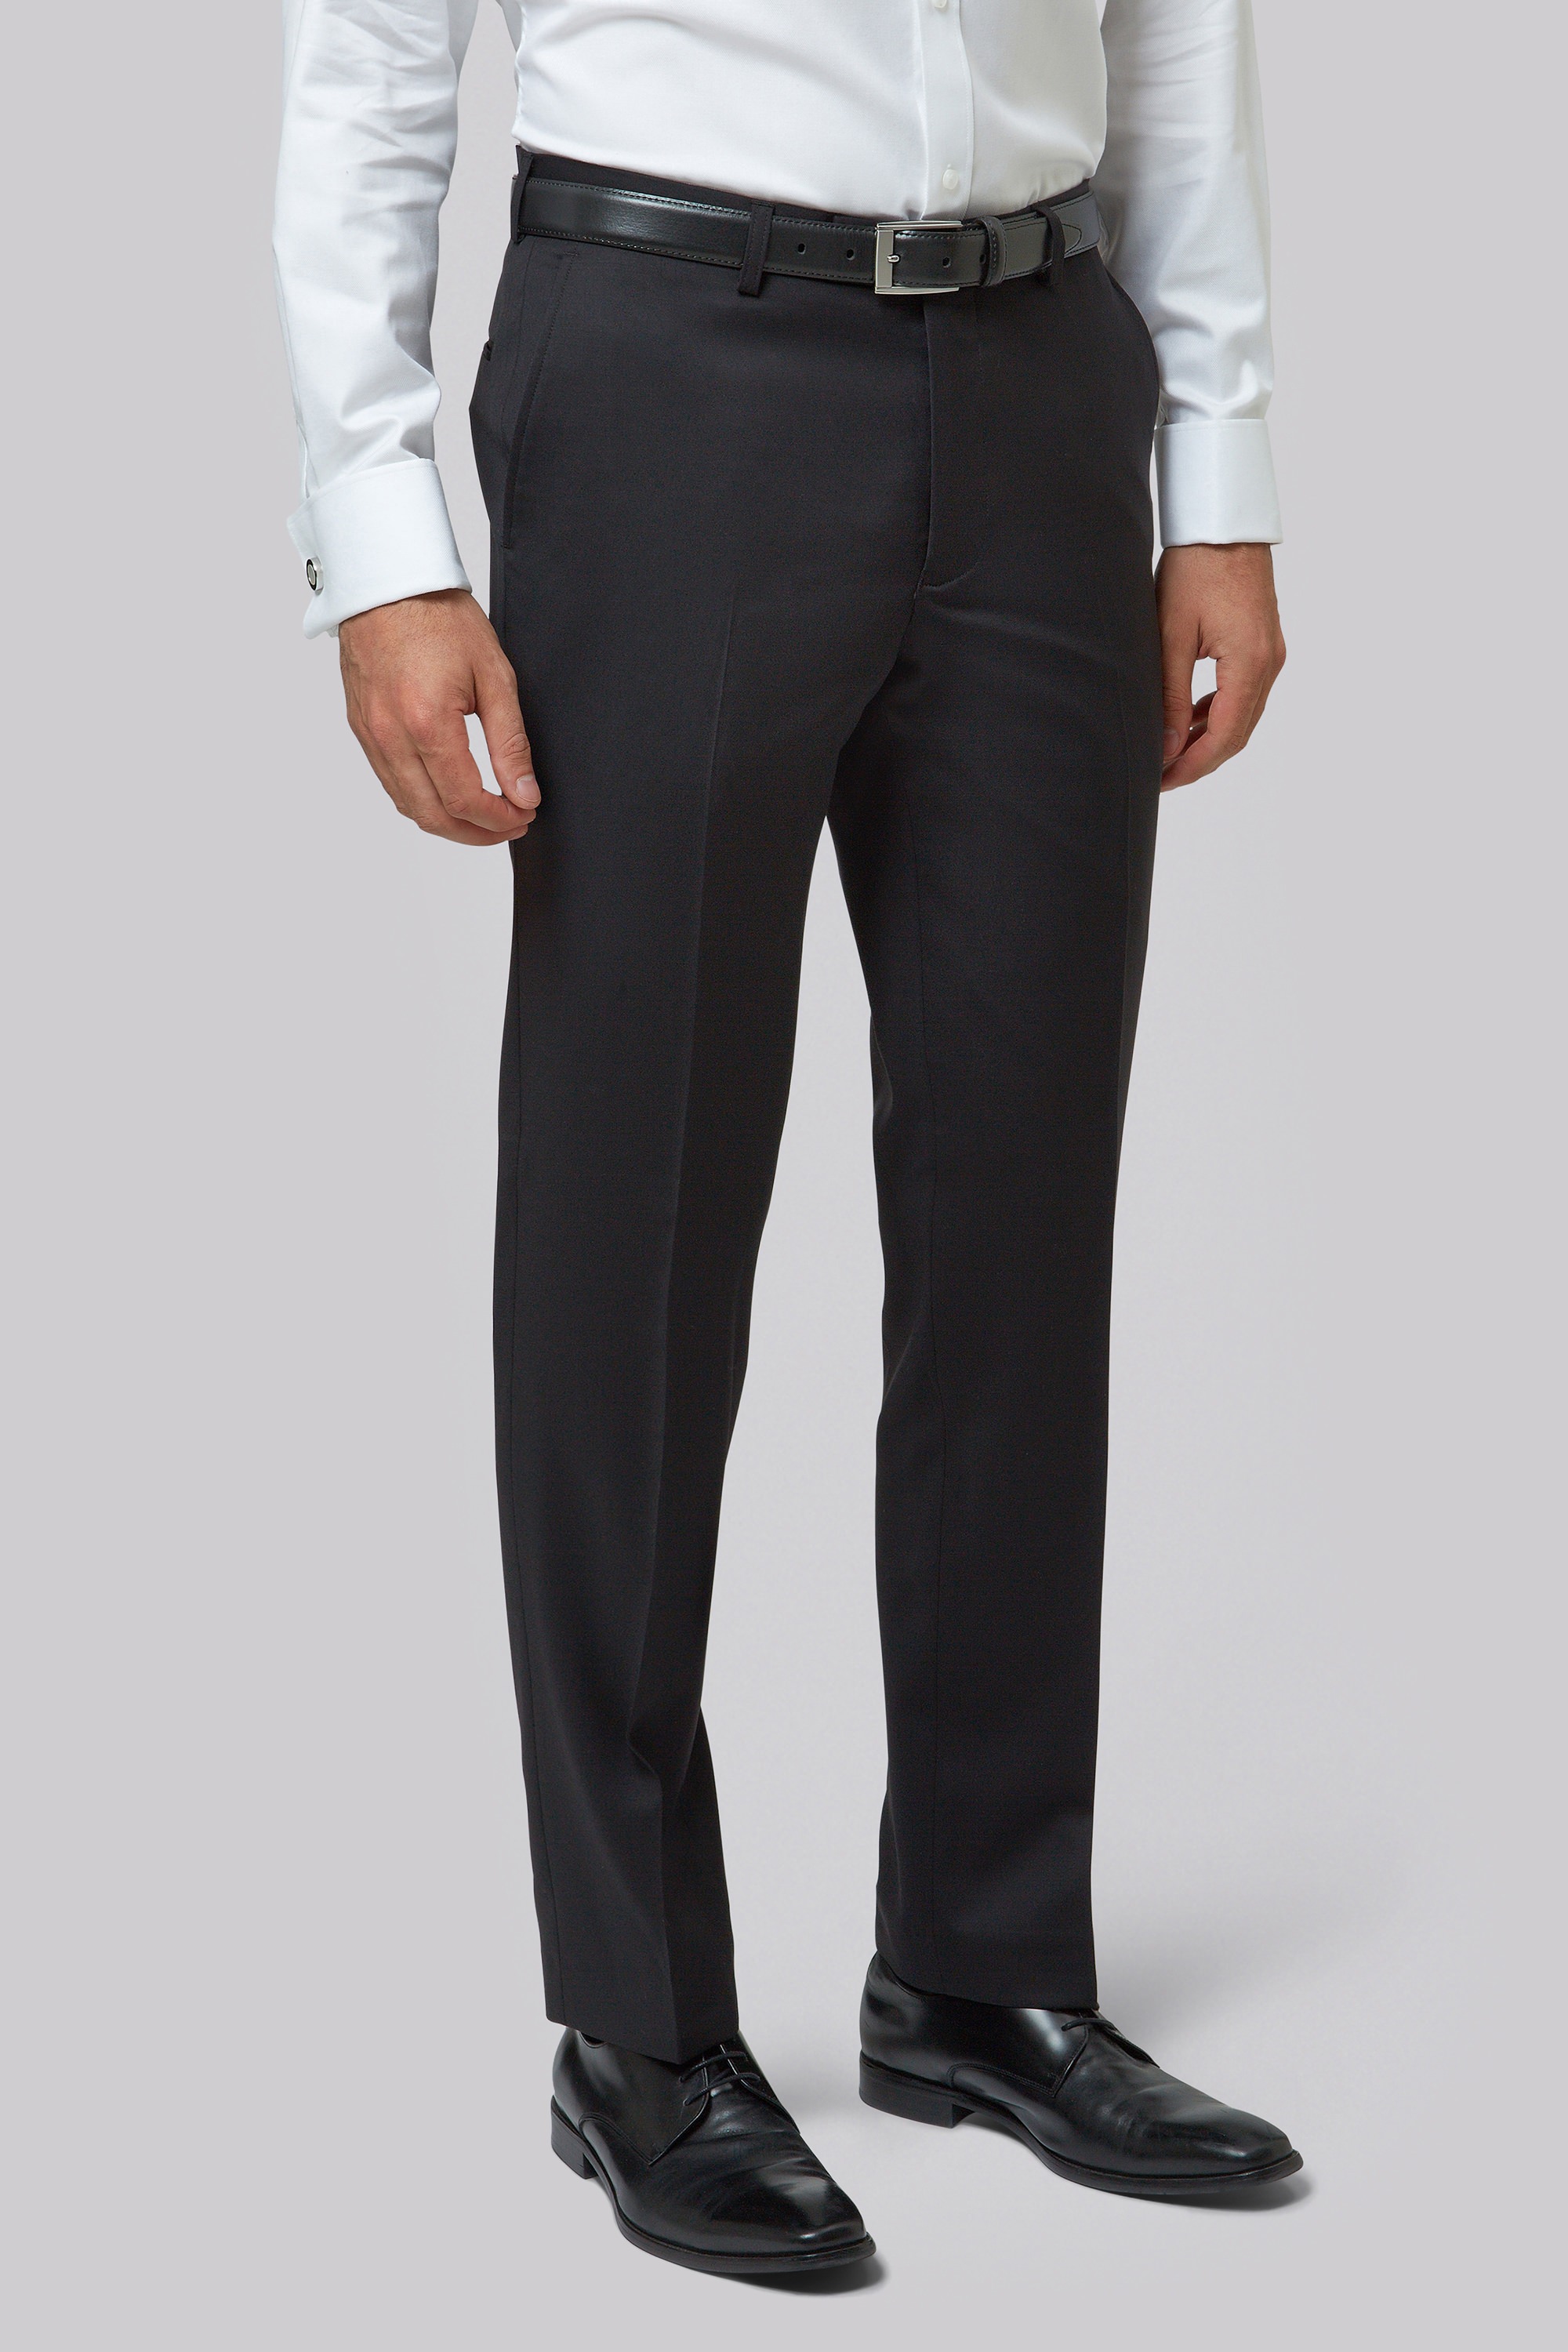 Moss 1851 Tailored Fit Black Trousers